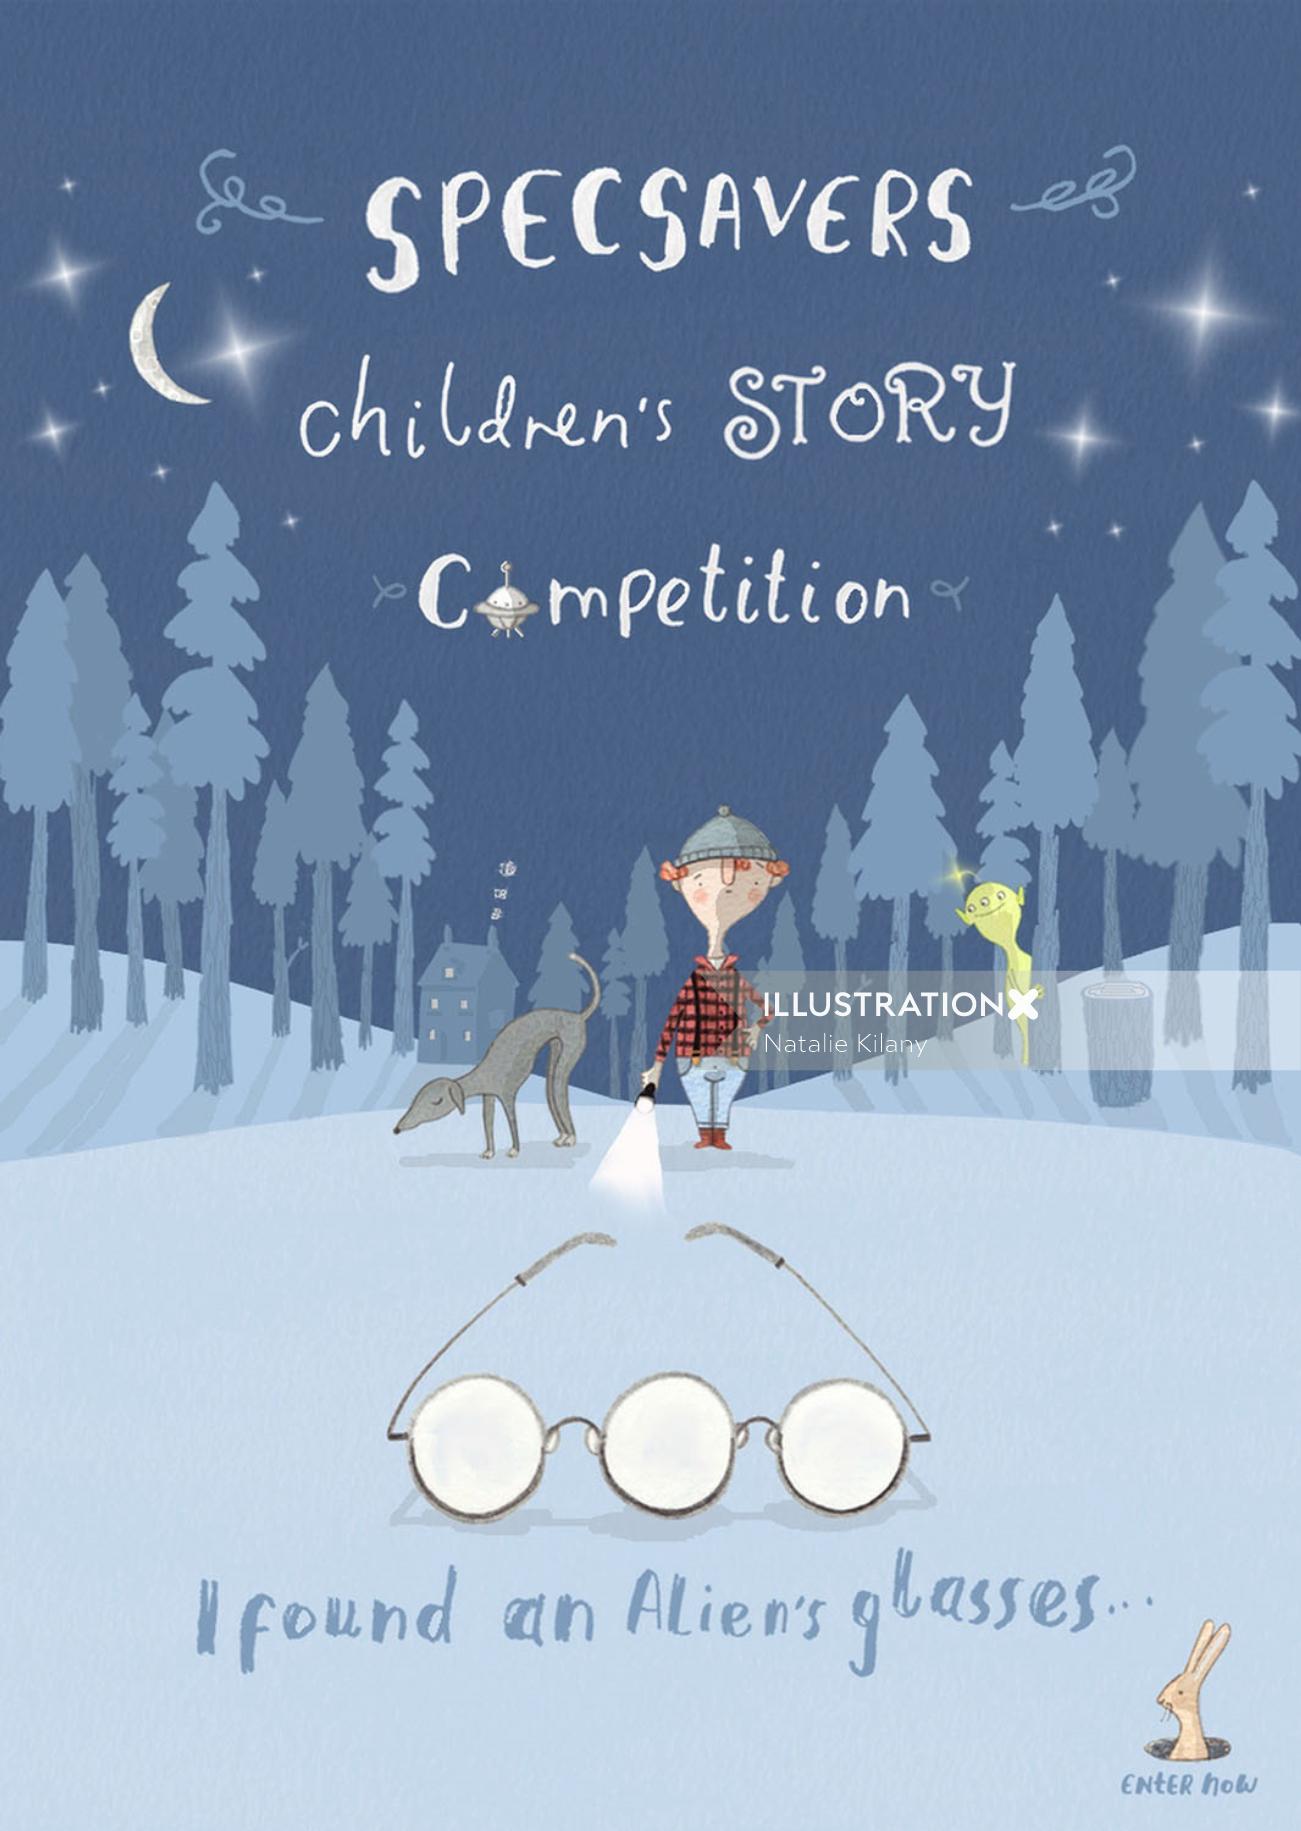 Book Cover of Specsavers children's story competition 